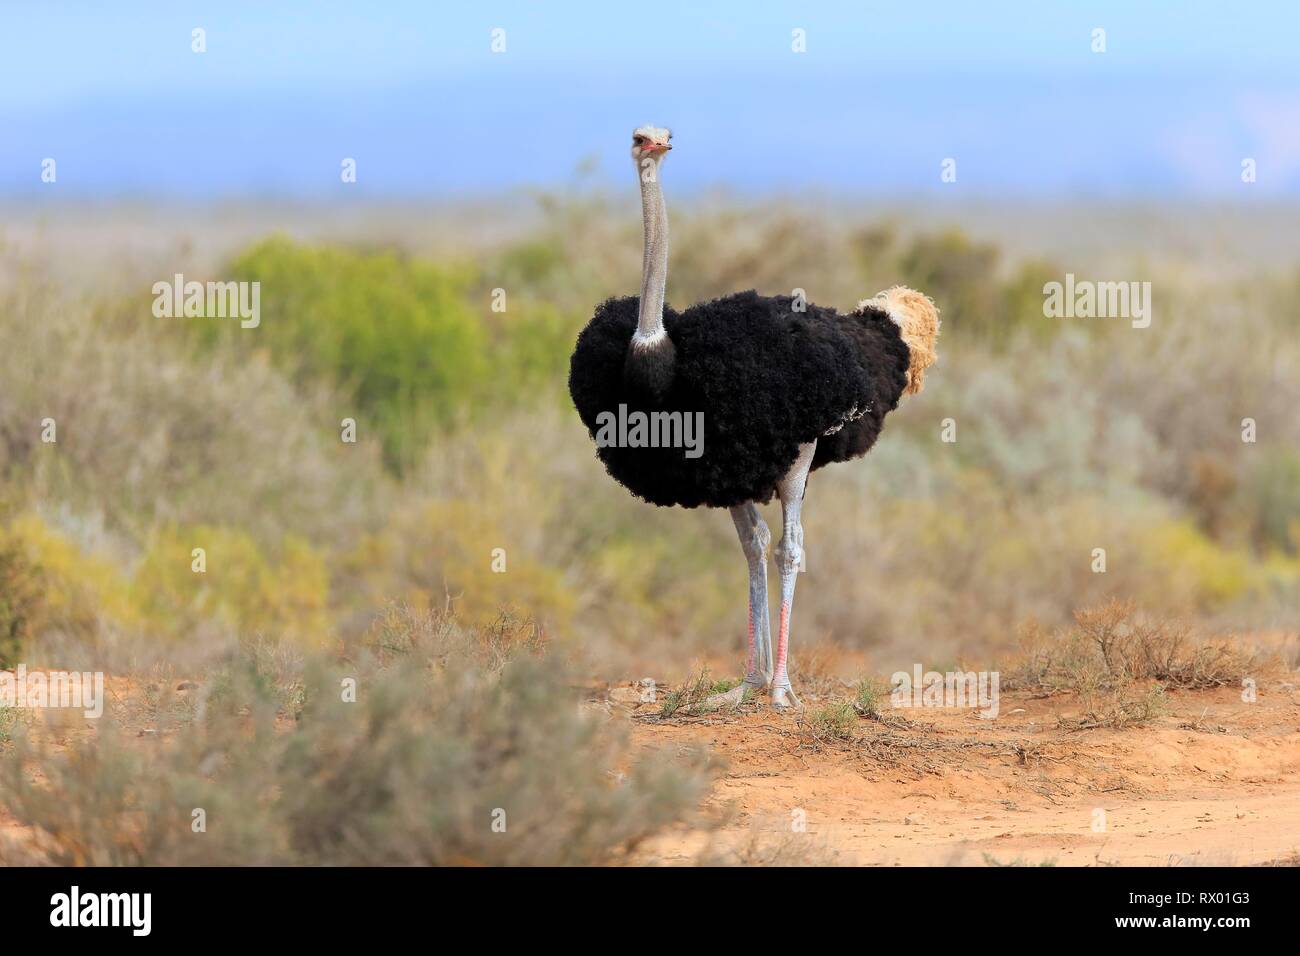 South African ostrich (Struthio camelus australis), adult male, Little Karoo, Western Cape, South Africa Stock Photo